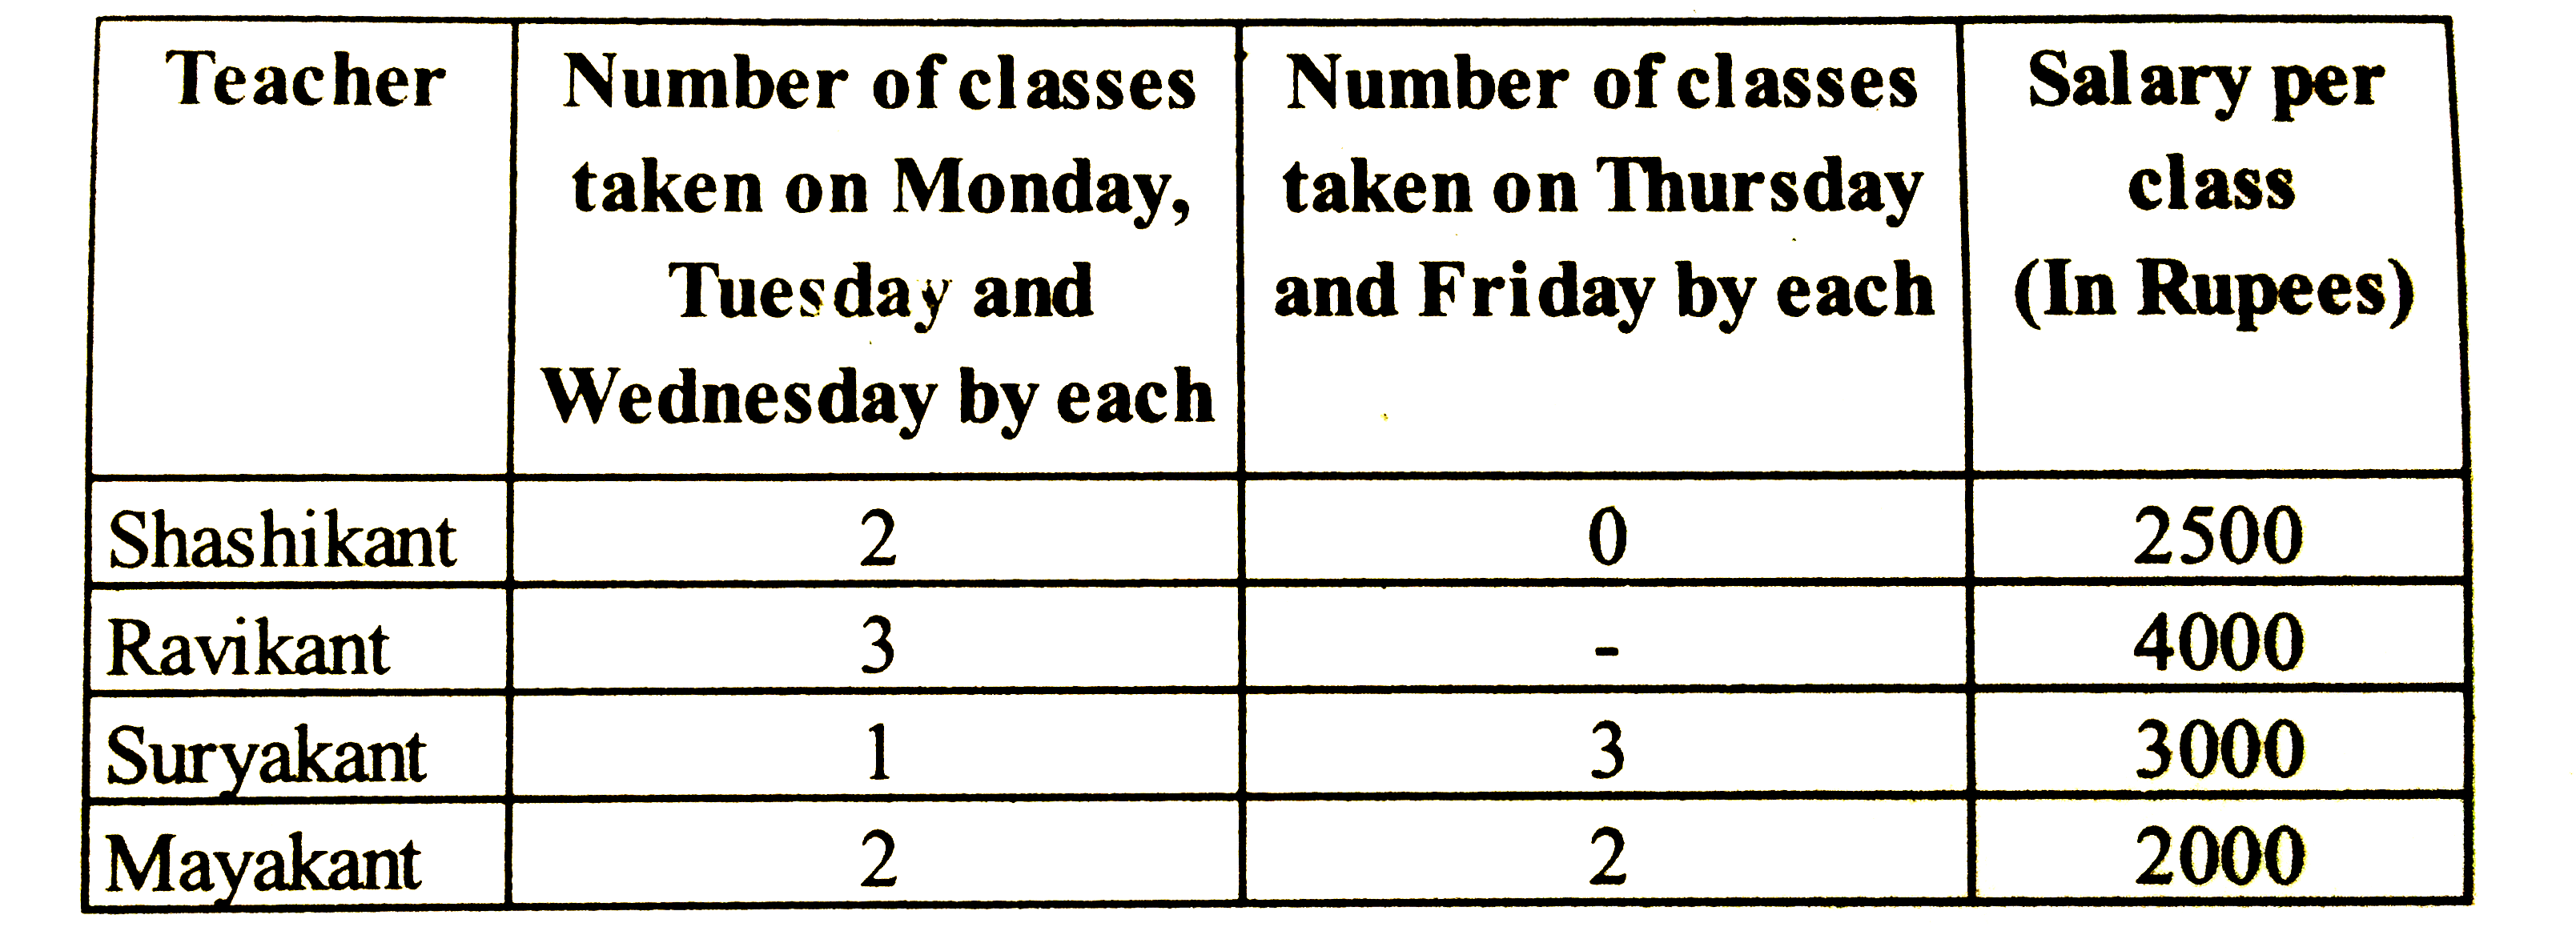 The following table shows the number of classes taken by each Teacher in different days and the total number amount given to the Teacher per class For the certain course also given      If Ravikant takes 2 classes each on Thursday and Friday, then how  much he can earn in a week ?